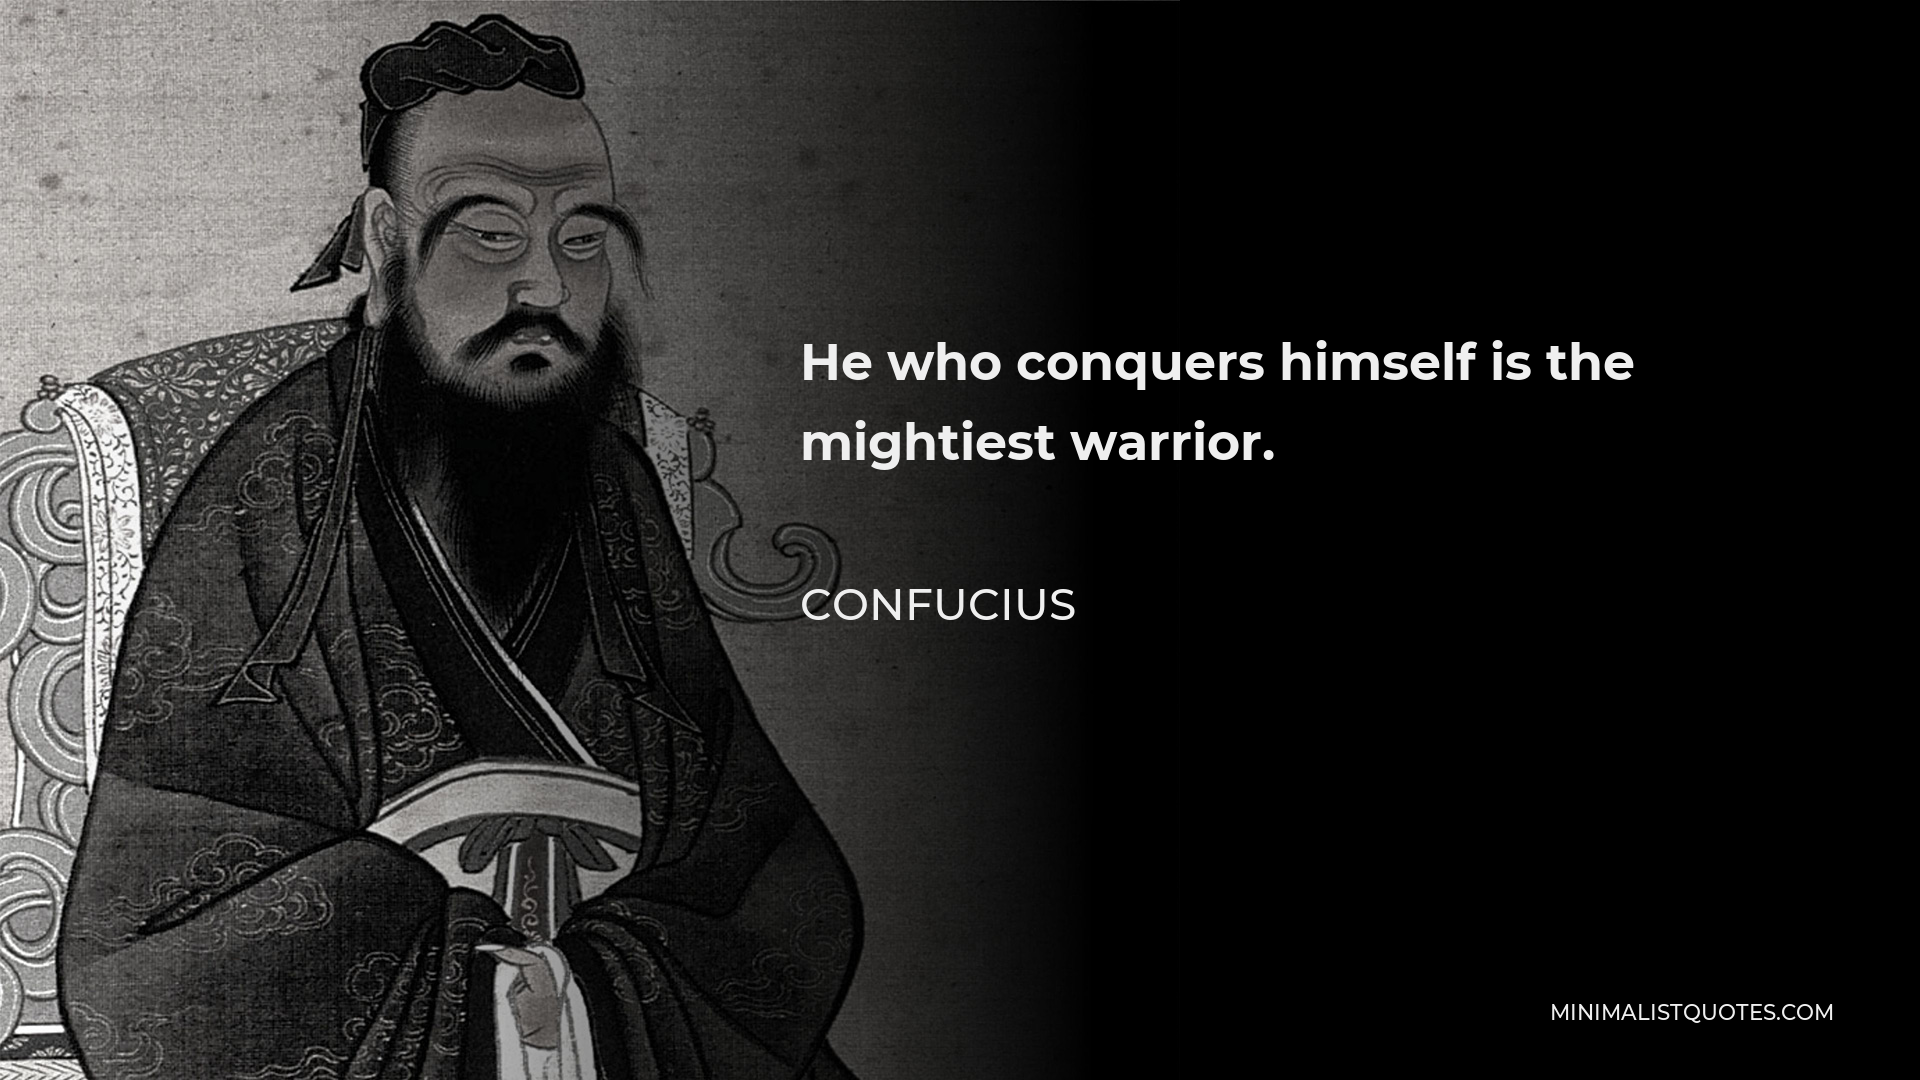 Confucius Quote - He who conquers himself is the mightiest warrior.